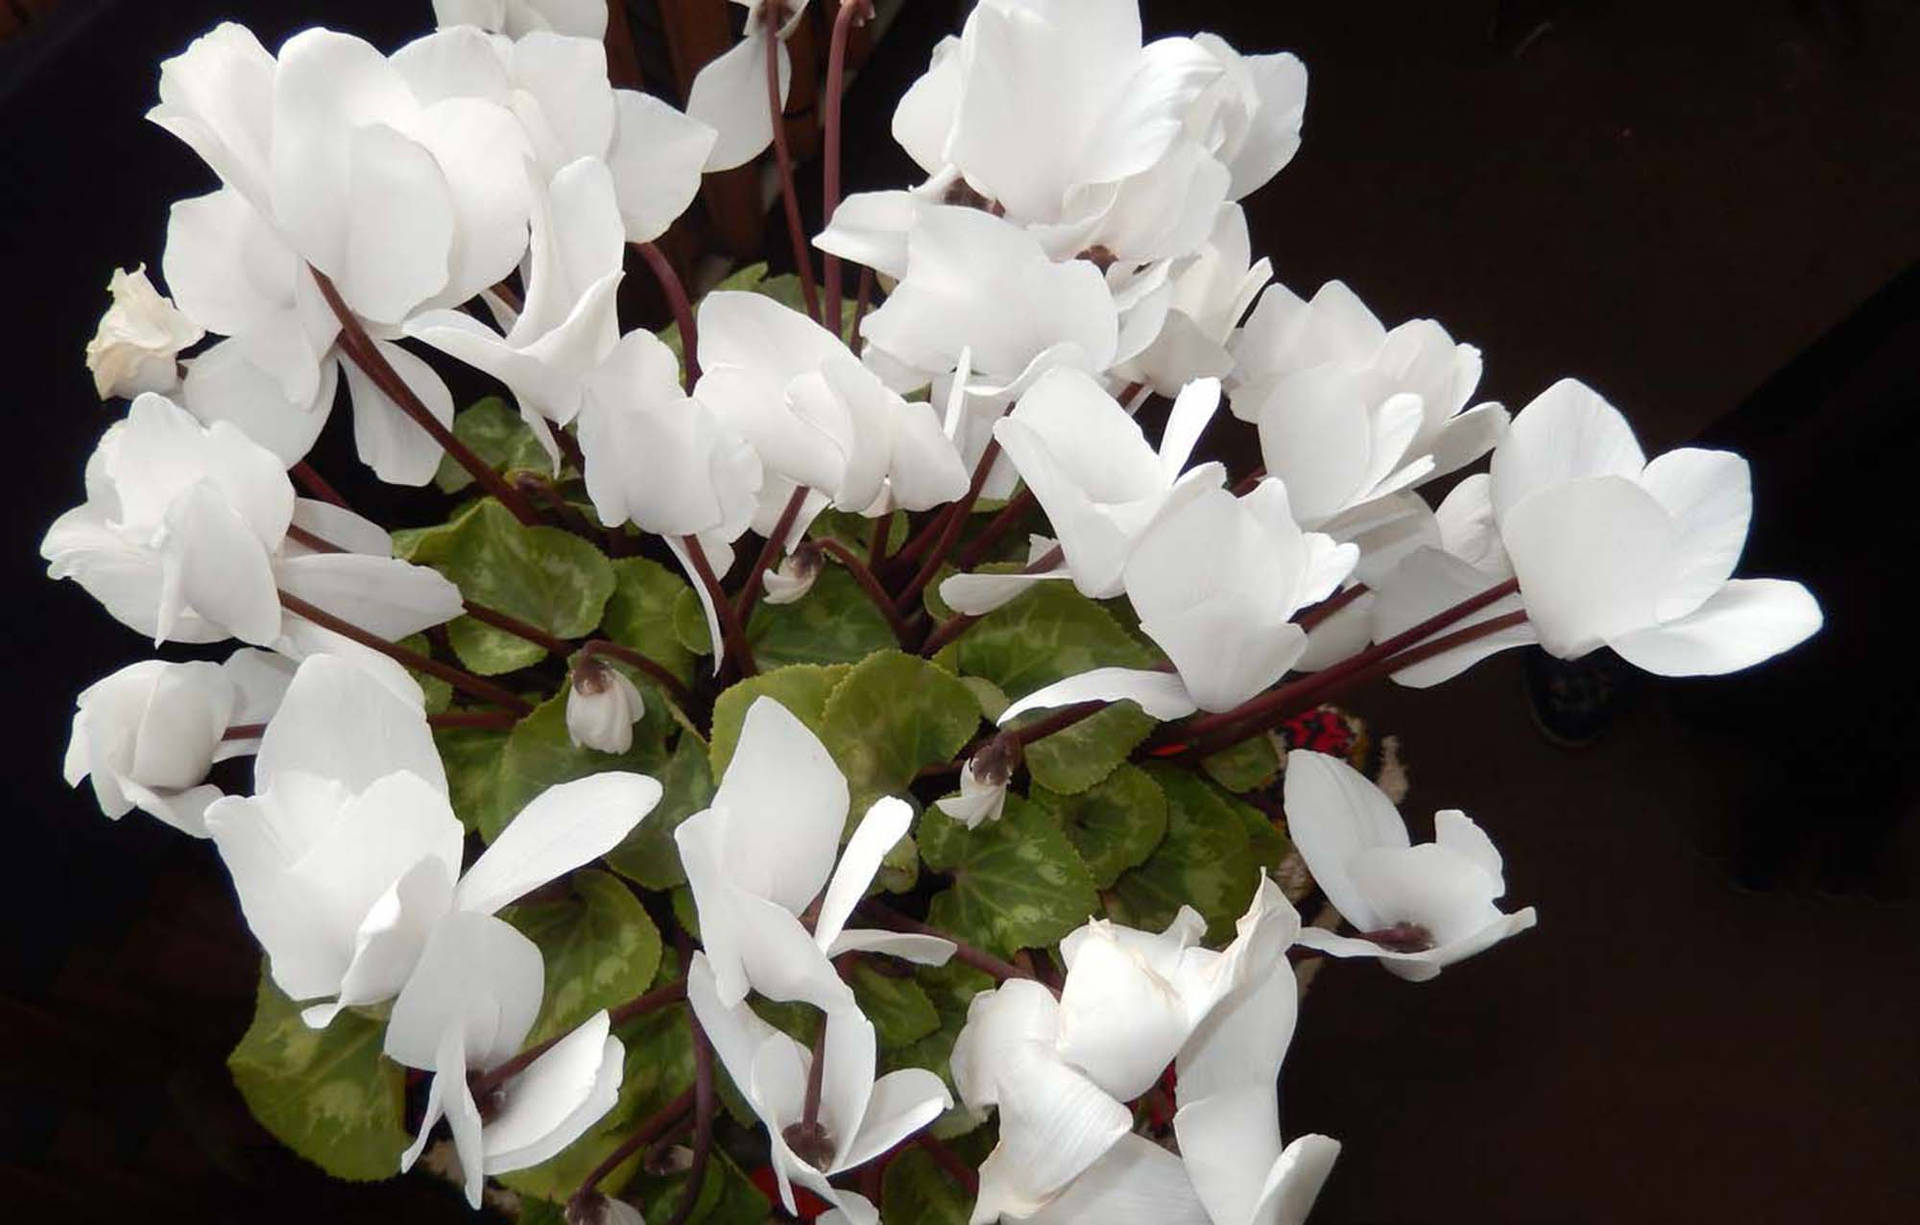 Stunning White Cyclamen In Full Bloom Background